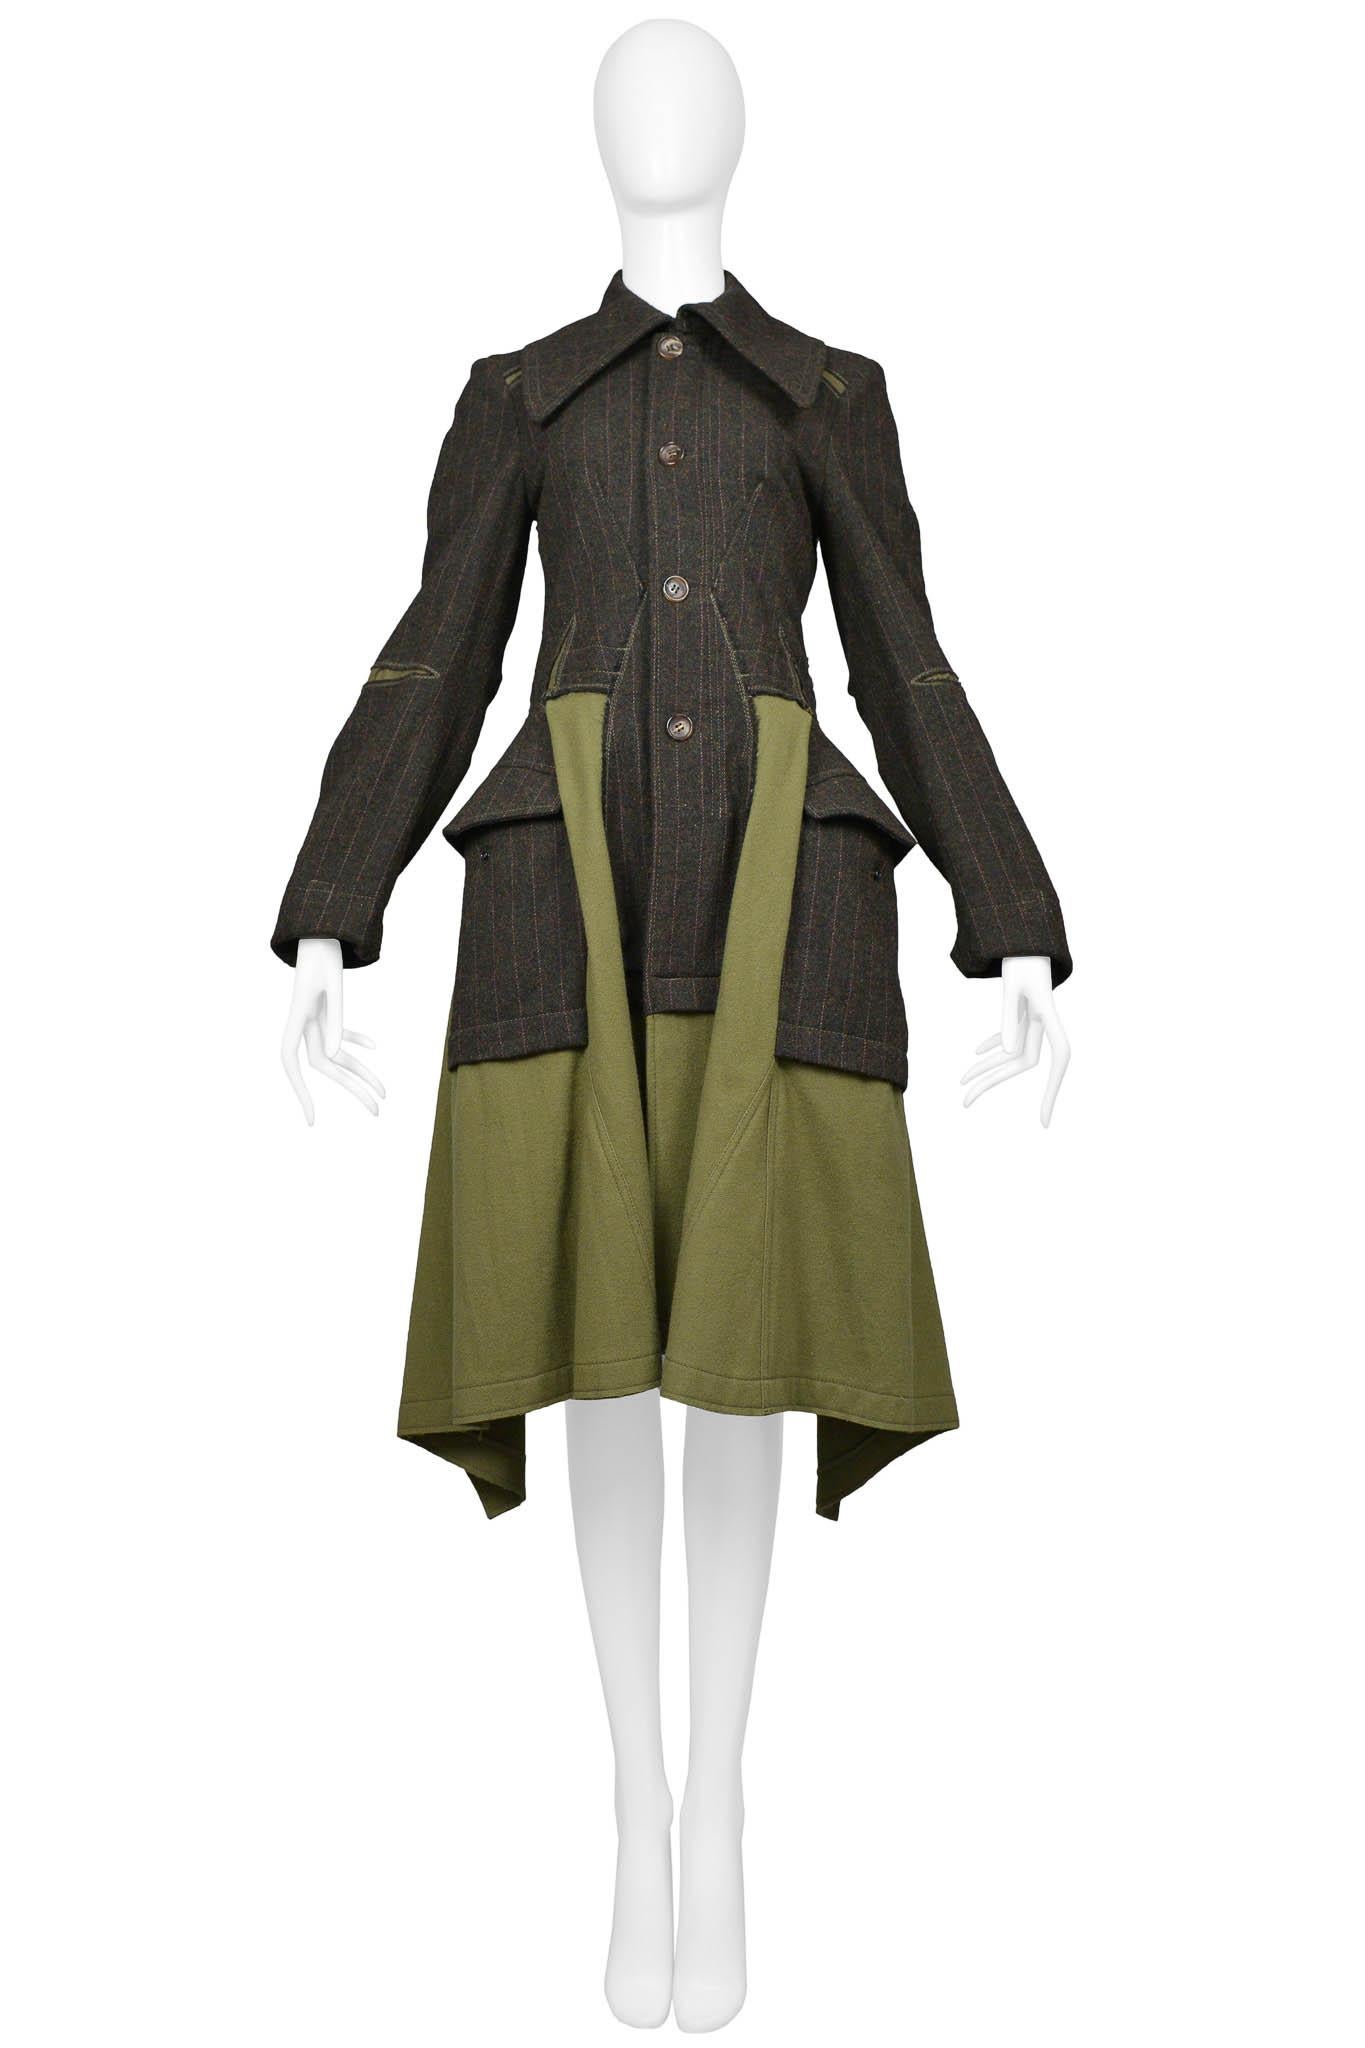 Resurrection Vintage is excited to offer a vintage Junya Watanabe wool coat featuring cargo insets, a high-to-low hem, a button front closure, and a pinstripe design.

Junya Watanabe
Size: Small
Exterior: Wool, Interior: Polyester, Cotton
Excellent